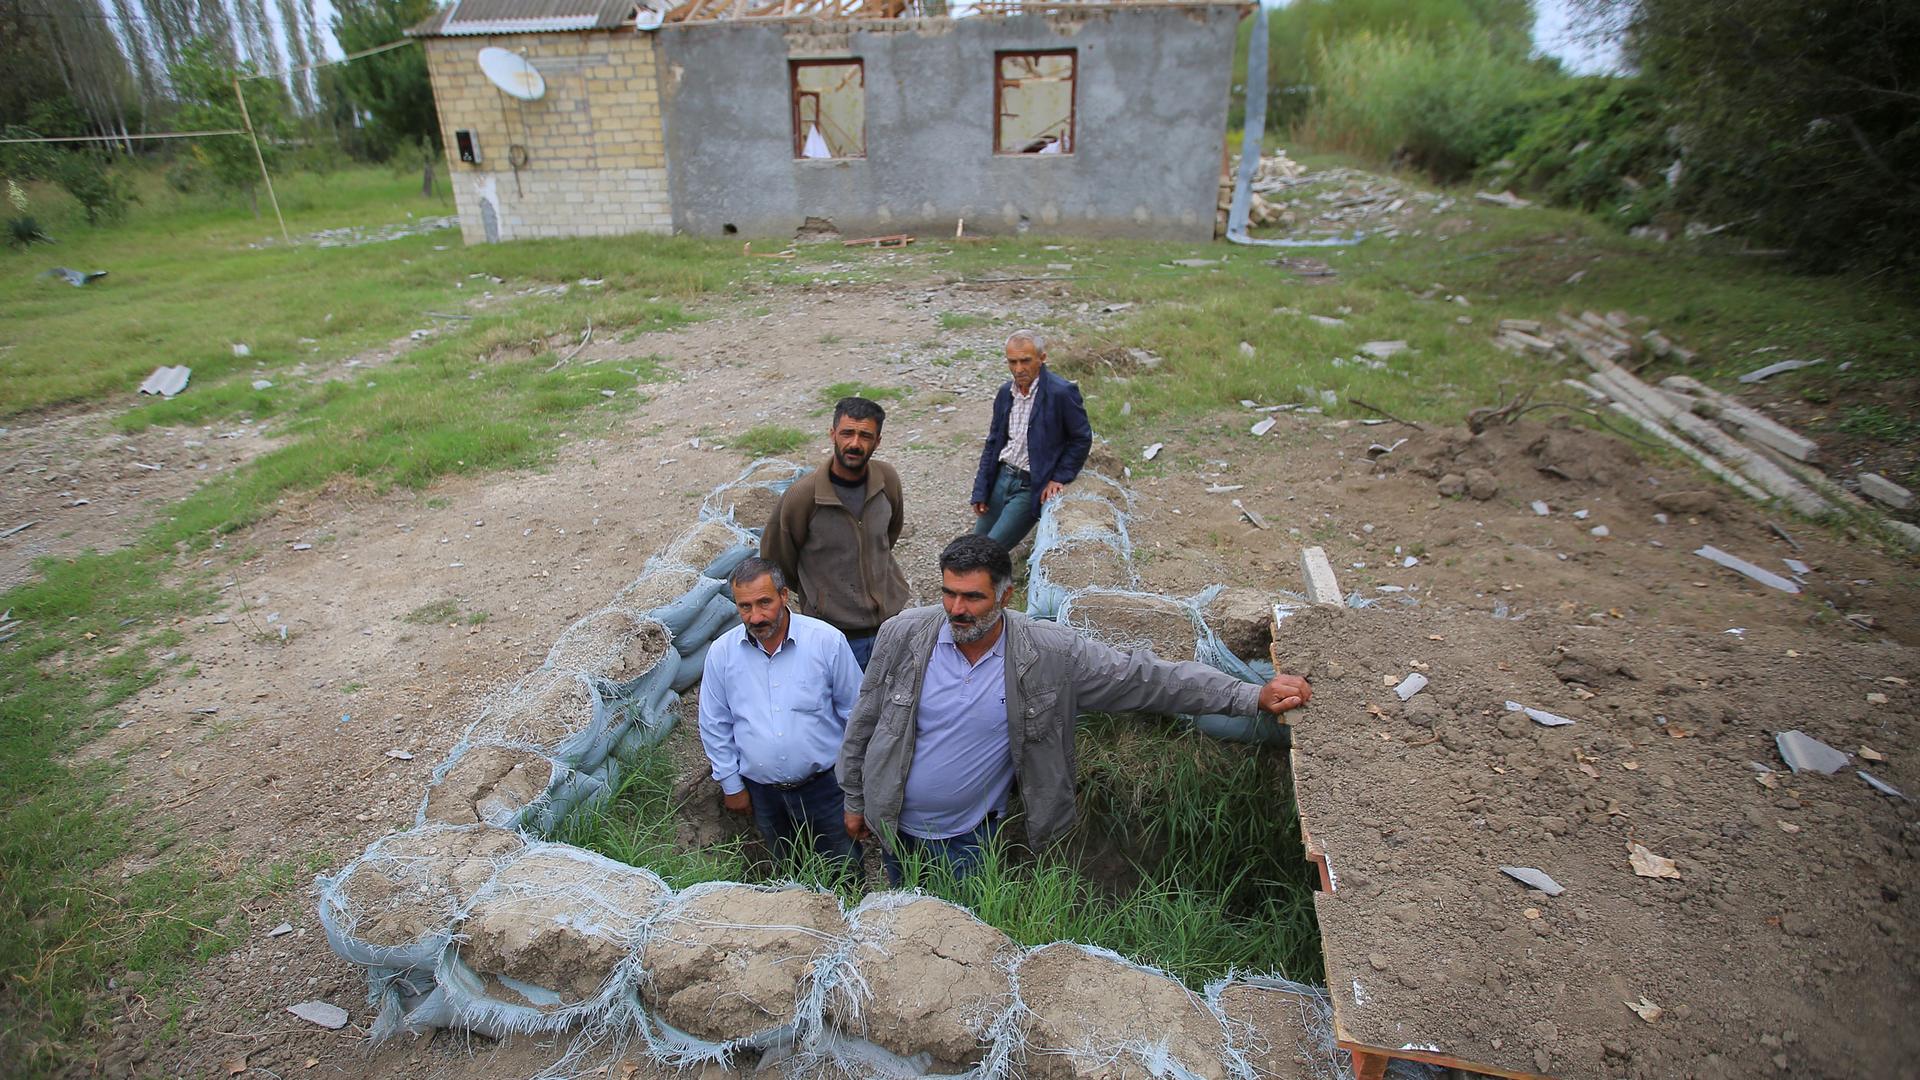 Four men are shown standing in an dug out area lined with stone in an open area near a house.